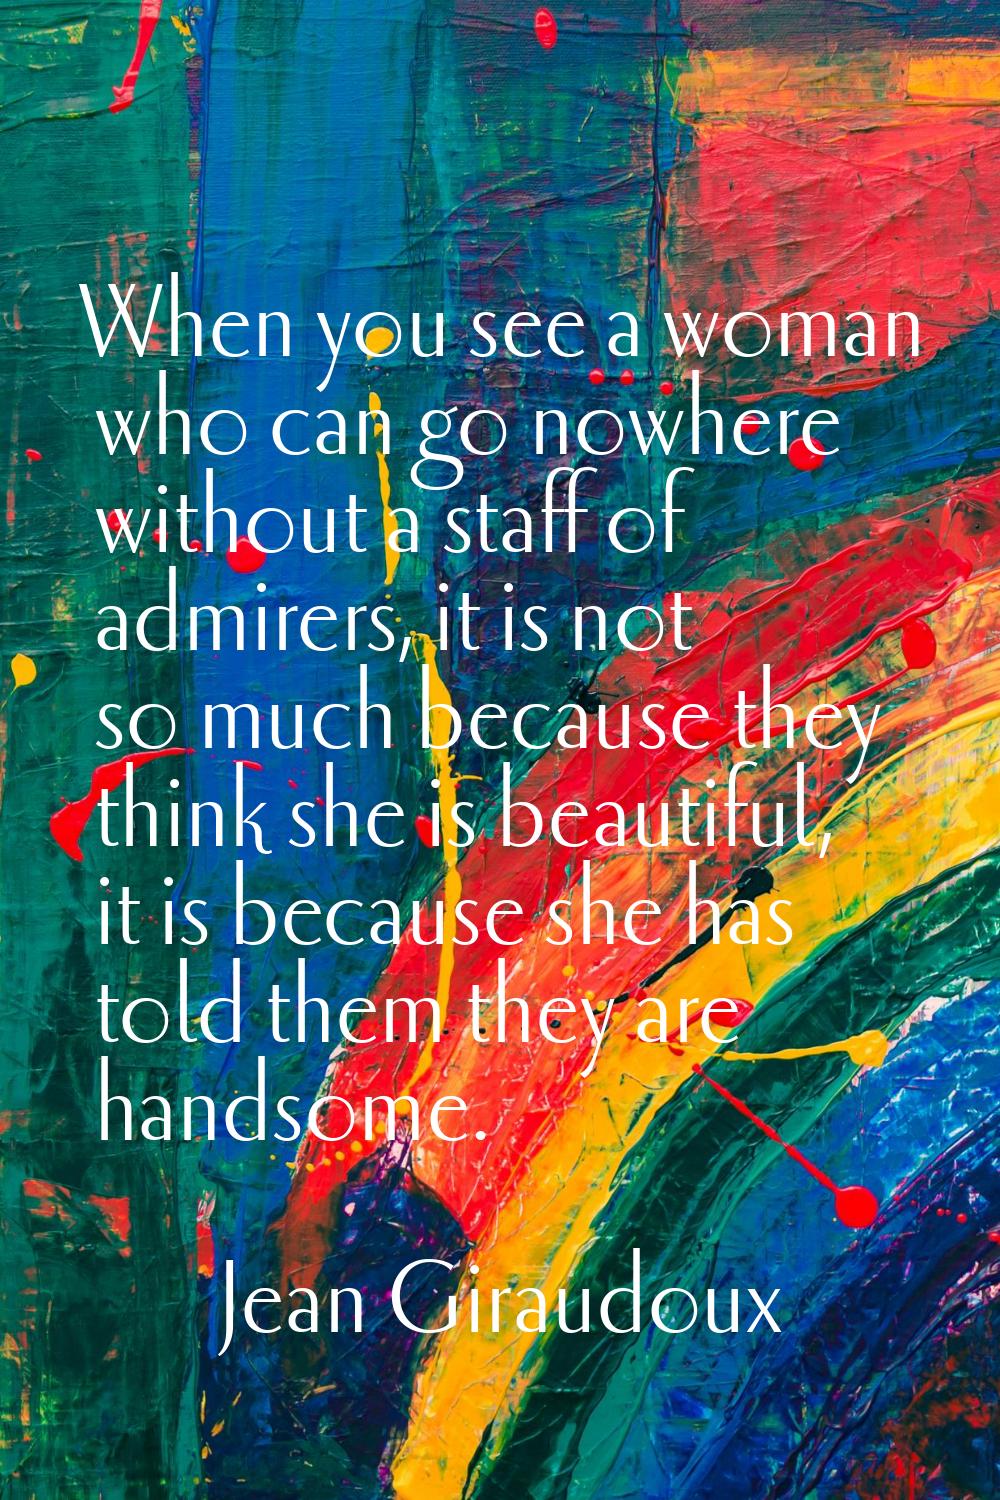 When you see a woman who can go nowhere without a staff of admirers, it is not so much because they